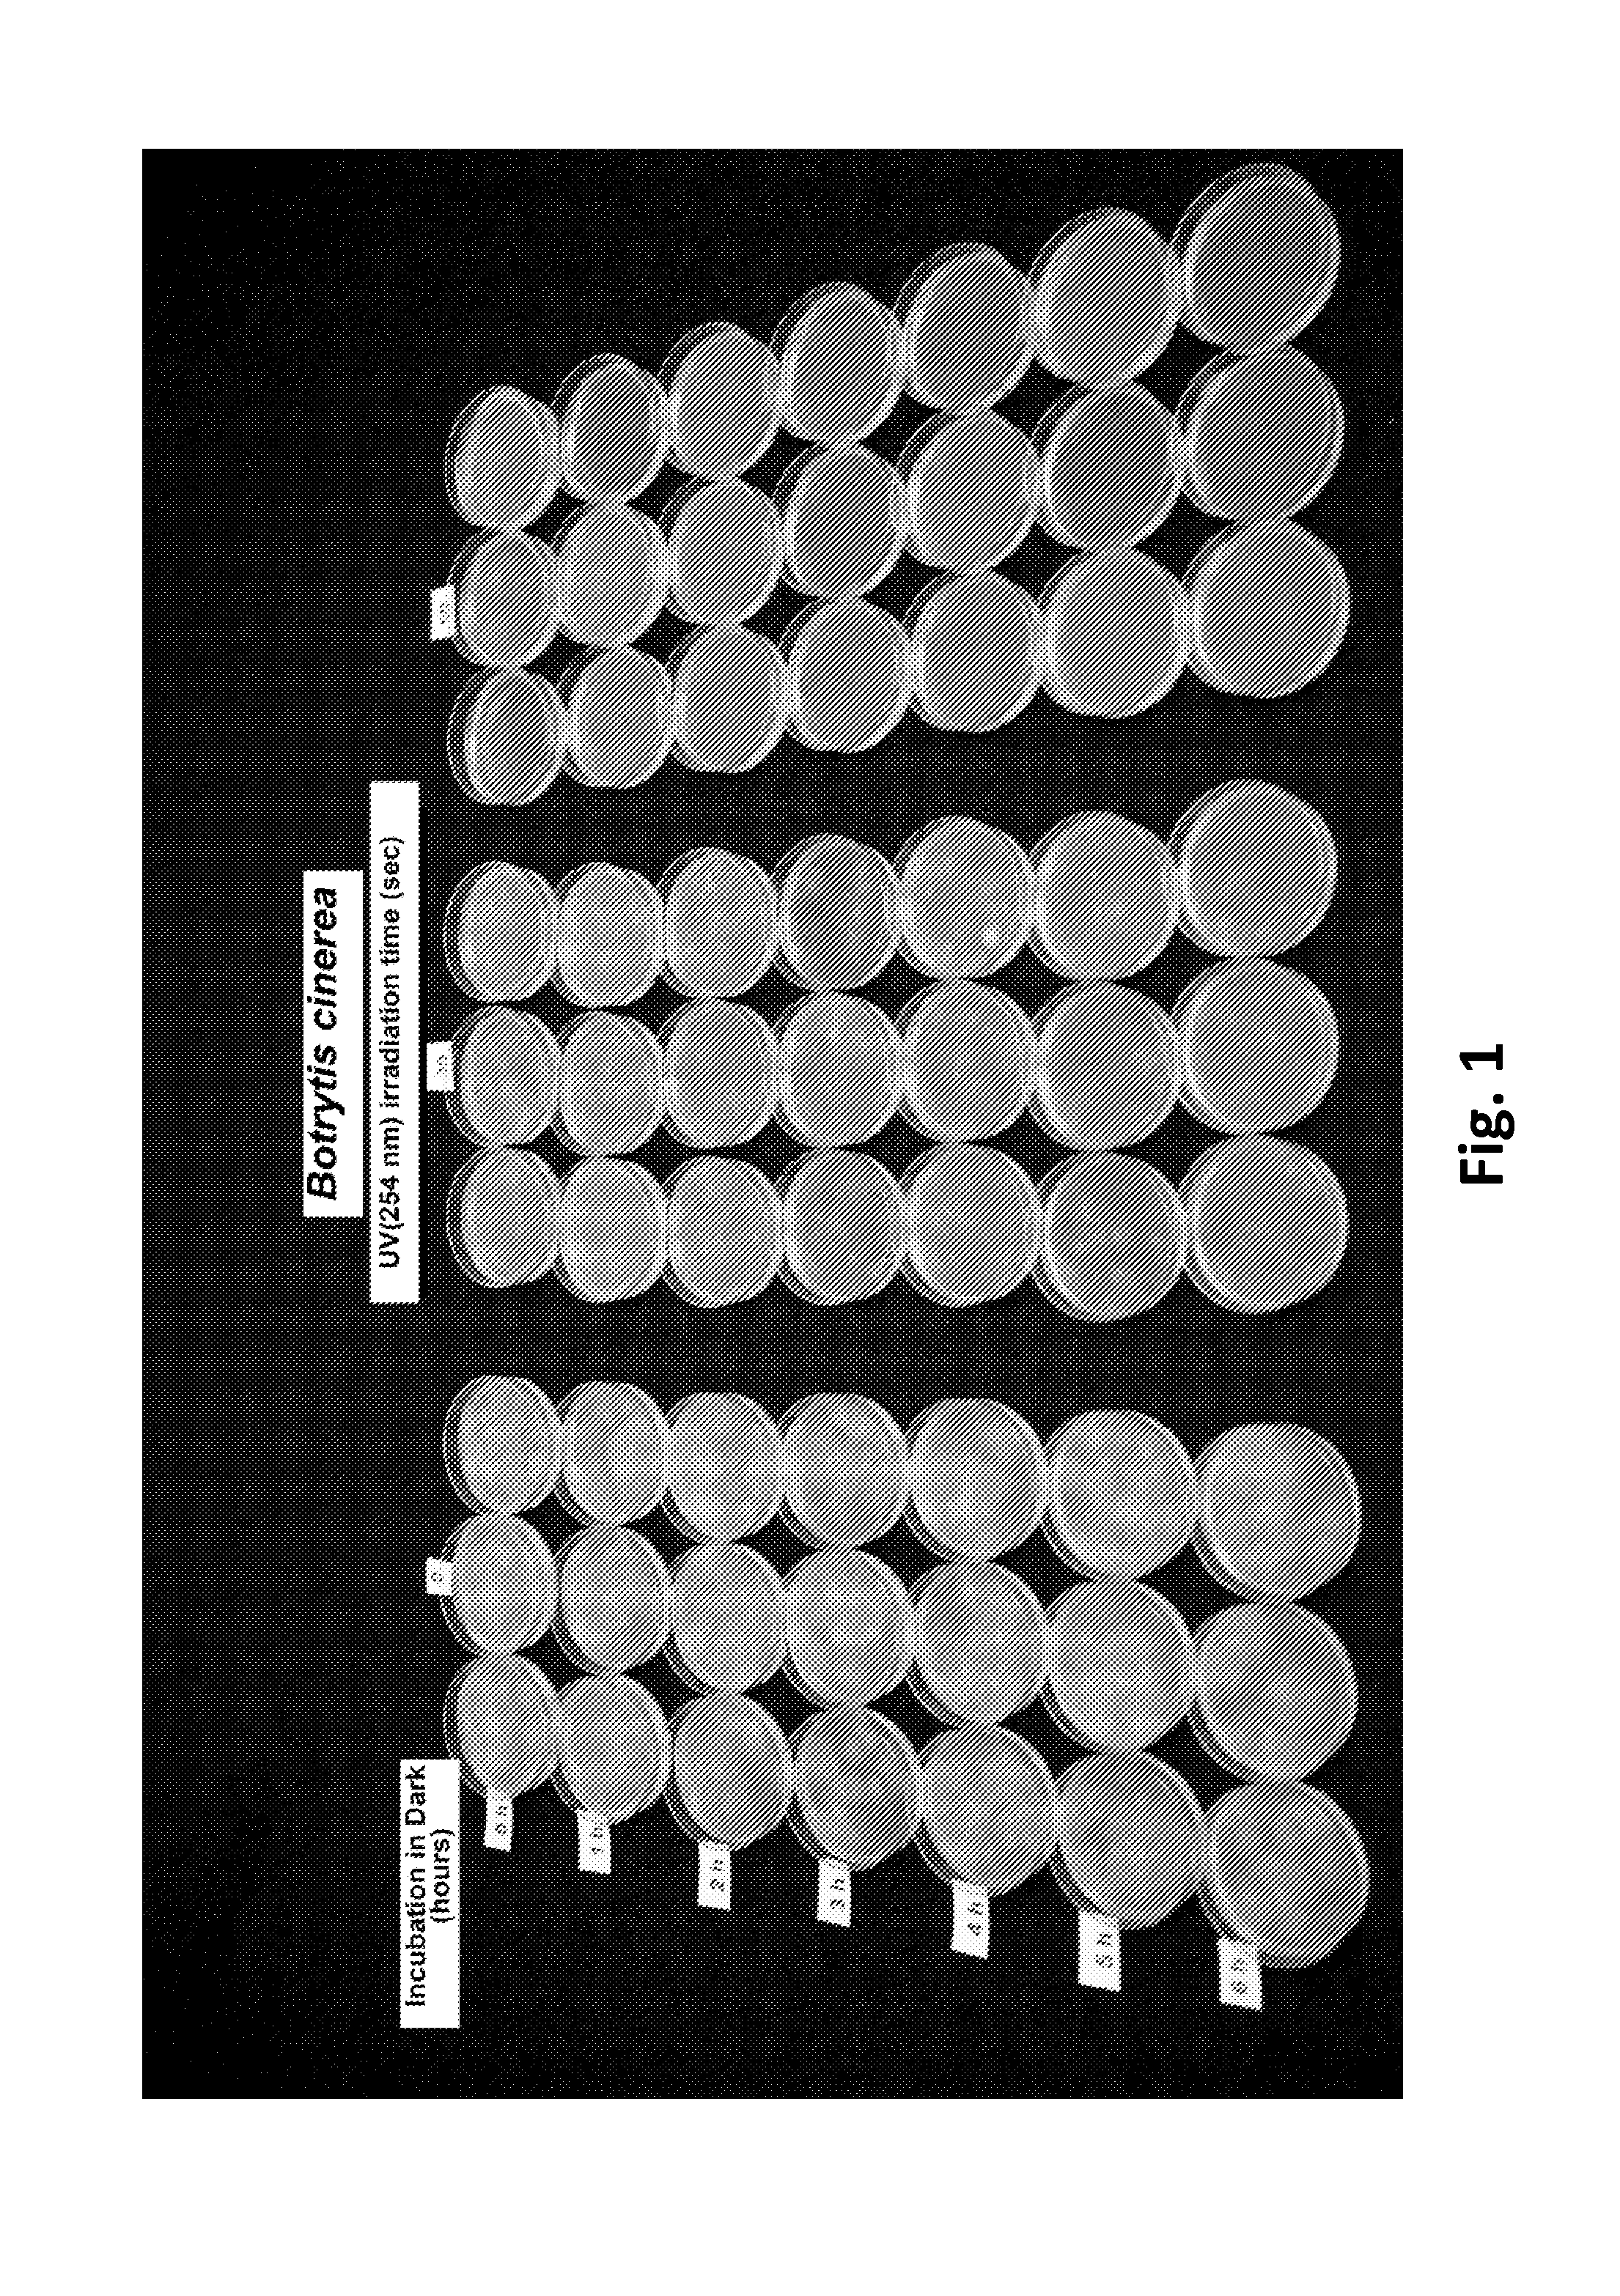 Method for Controlling Fungal Plant Pathogens Using a Combination of UV Radiation Followed by Antagonist Application and Dark Period